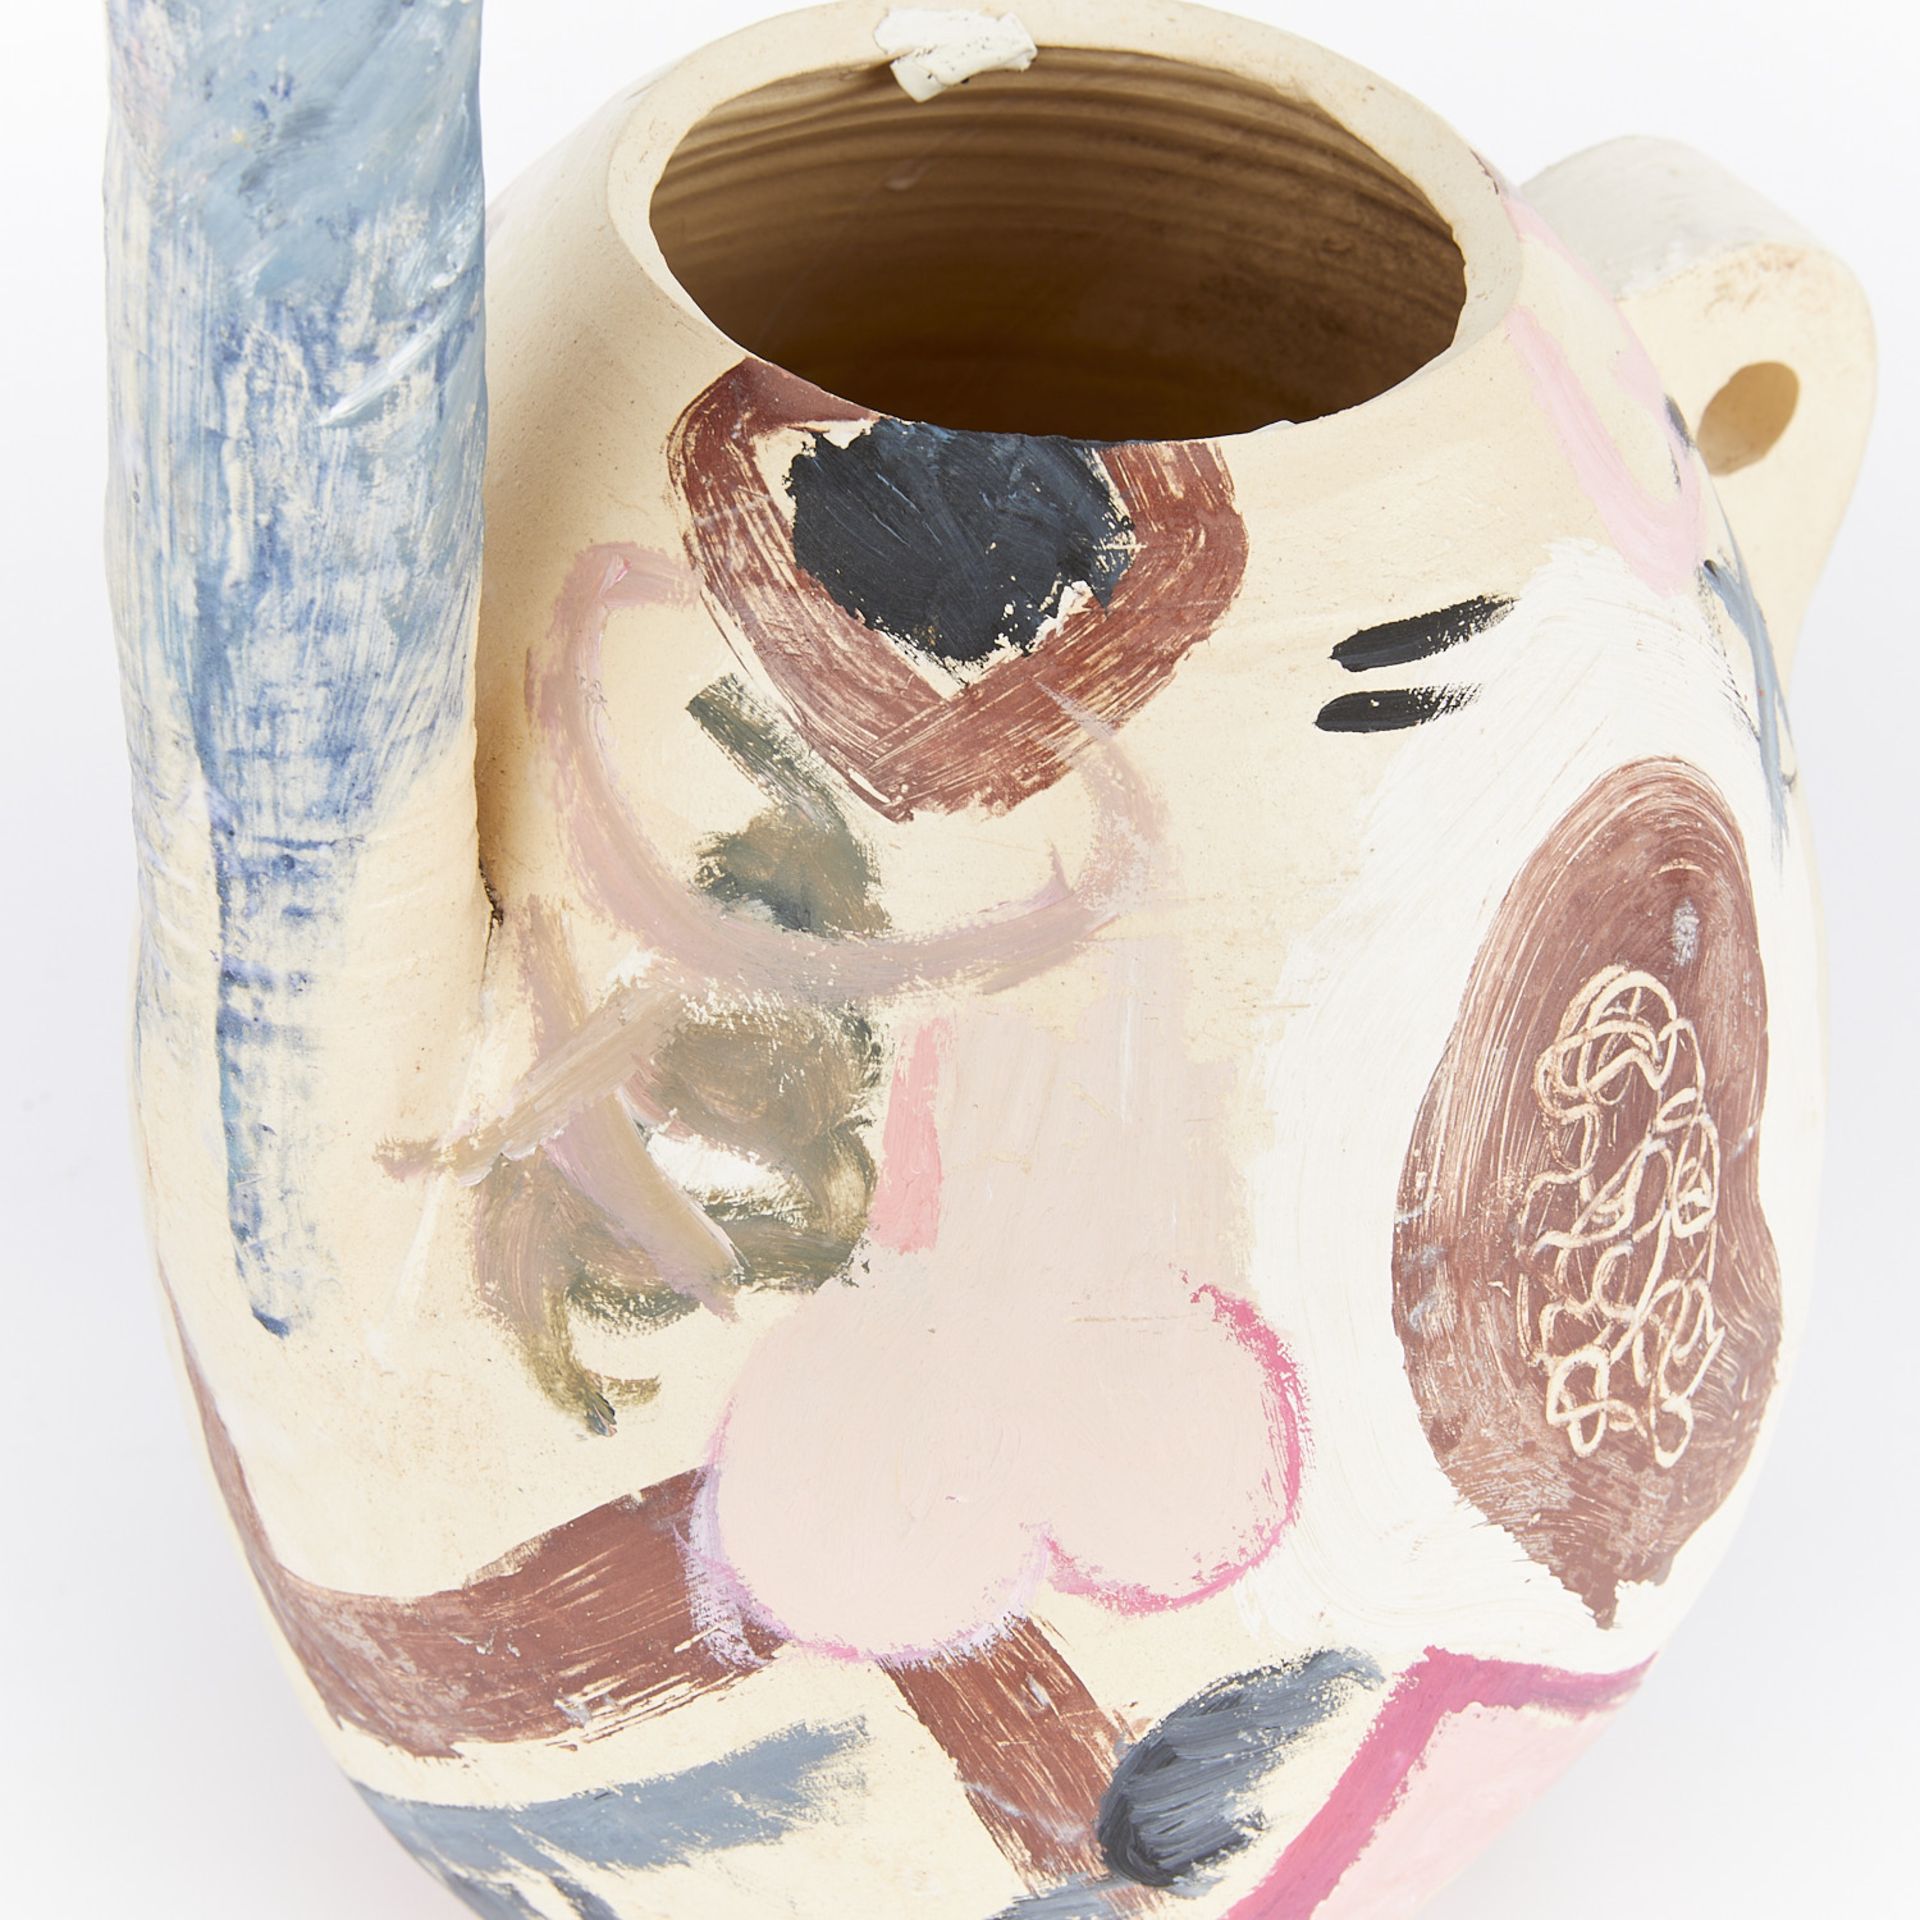 Laure Prouvost "Steaming For You" Painted Ceramic - Image 2 of 12